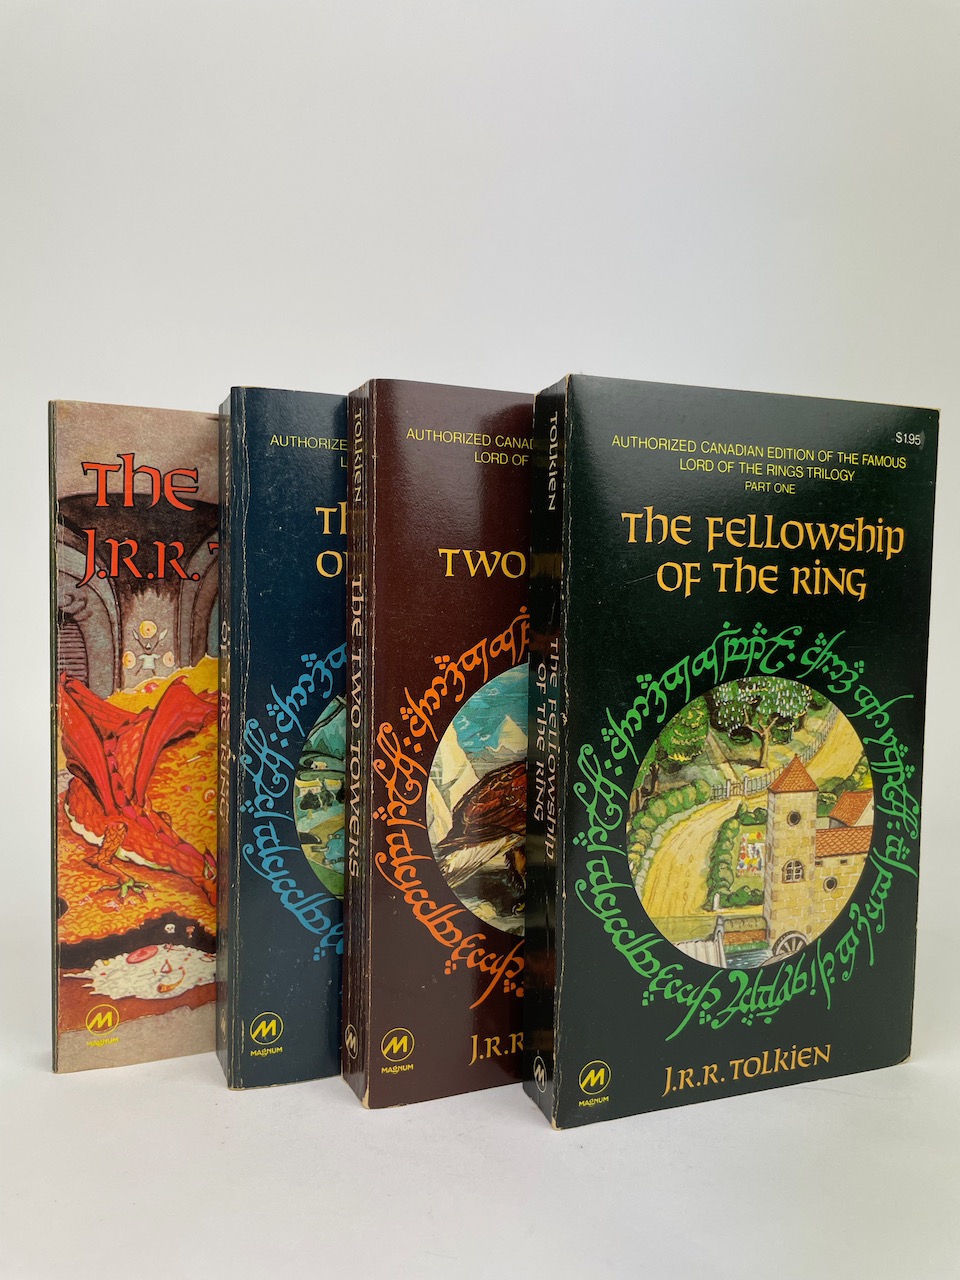 The Lord of the Rings and The Hobbit - Heroic Tales Set 1977 Magnum Edition 8